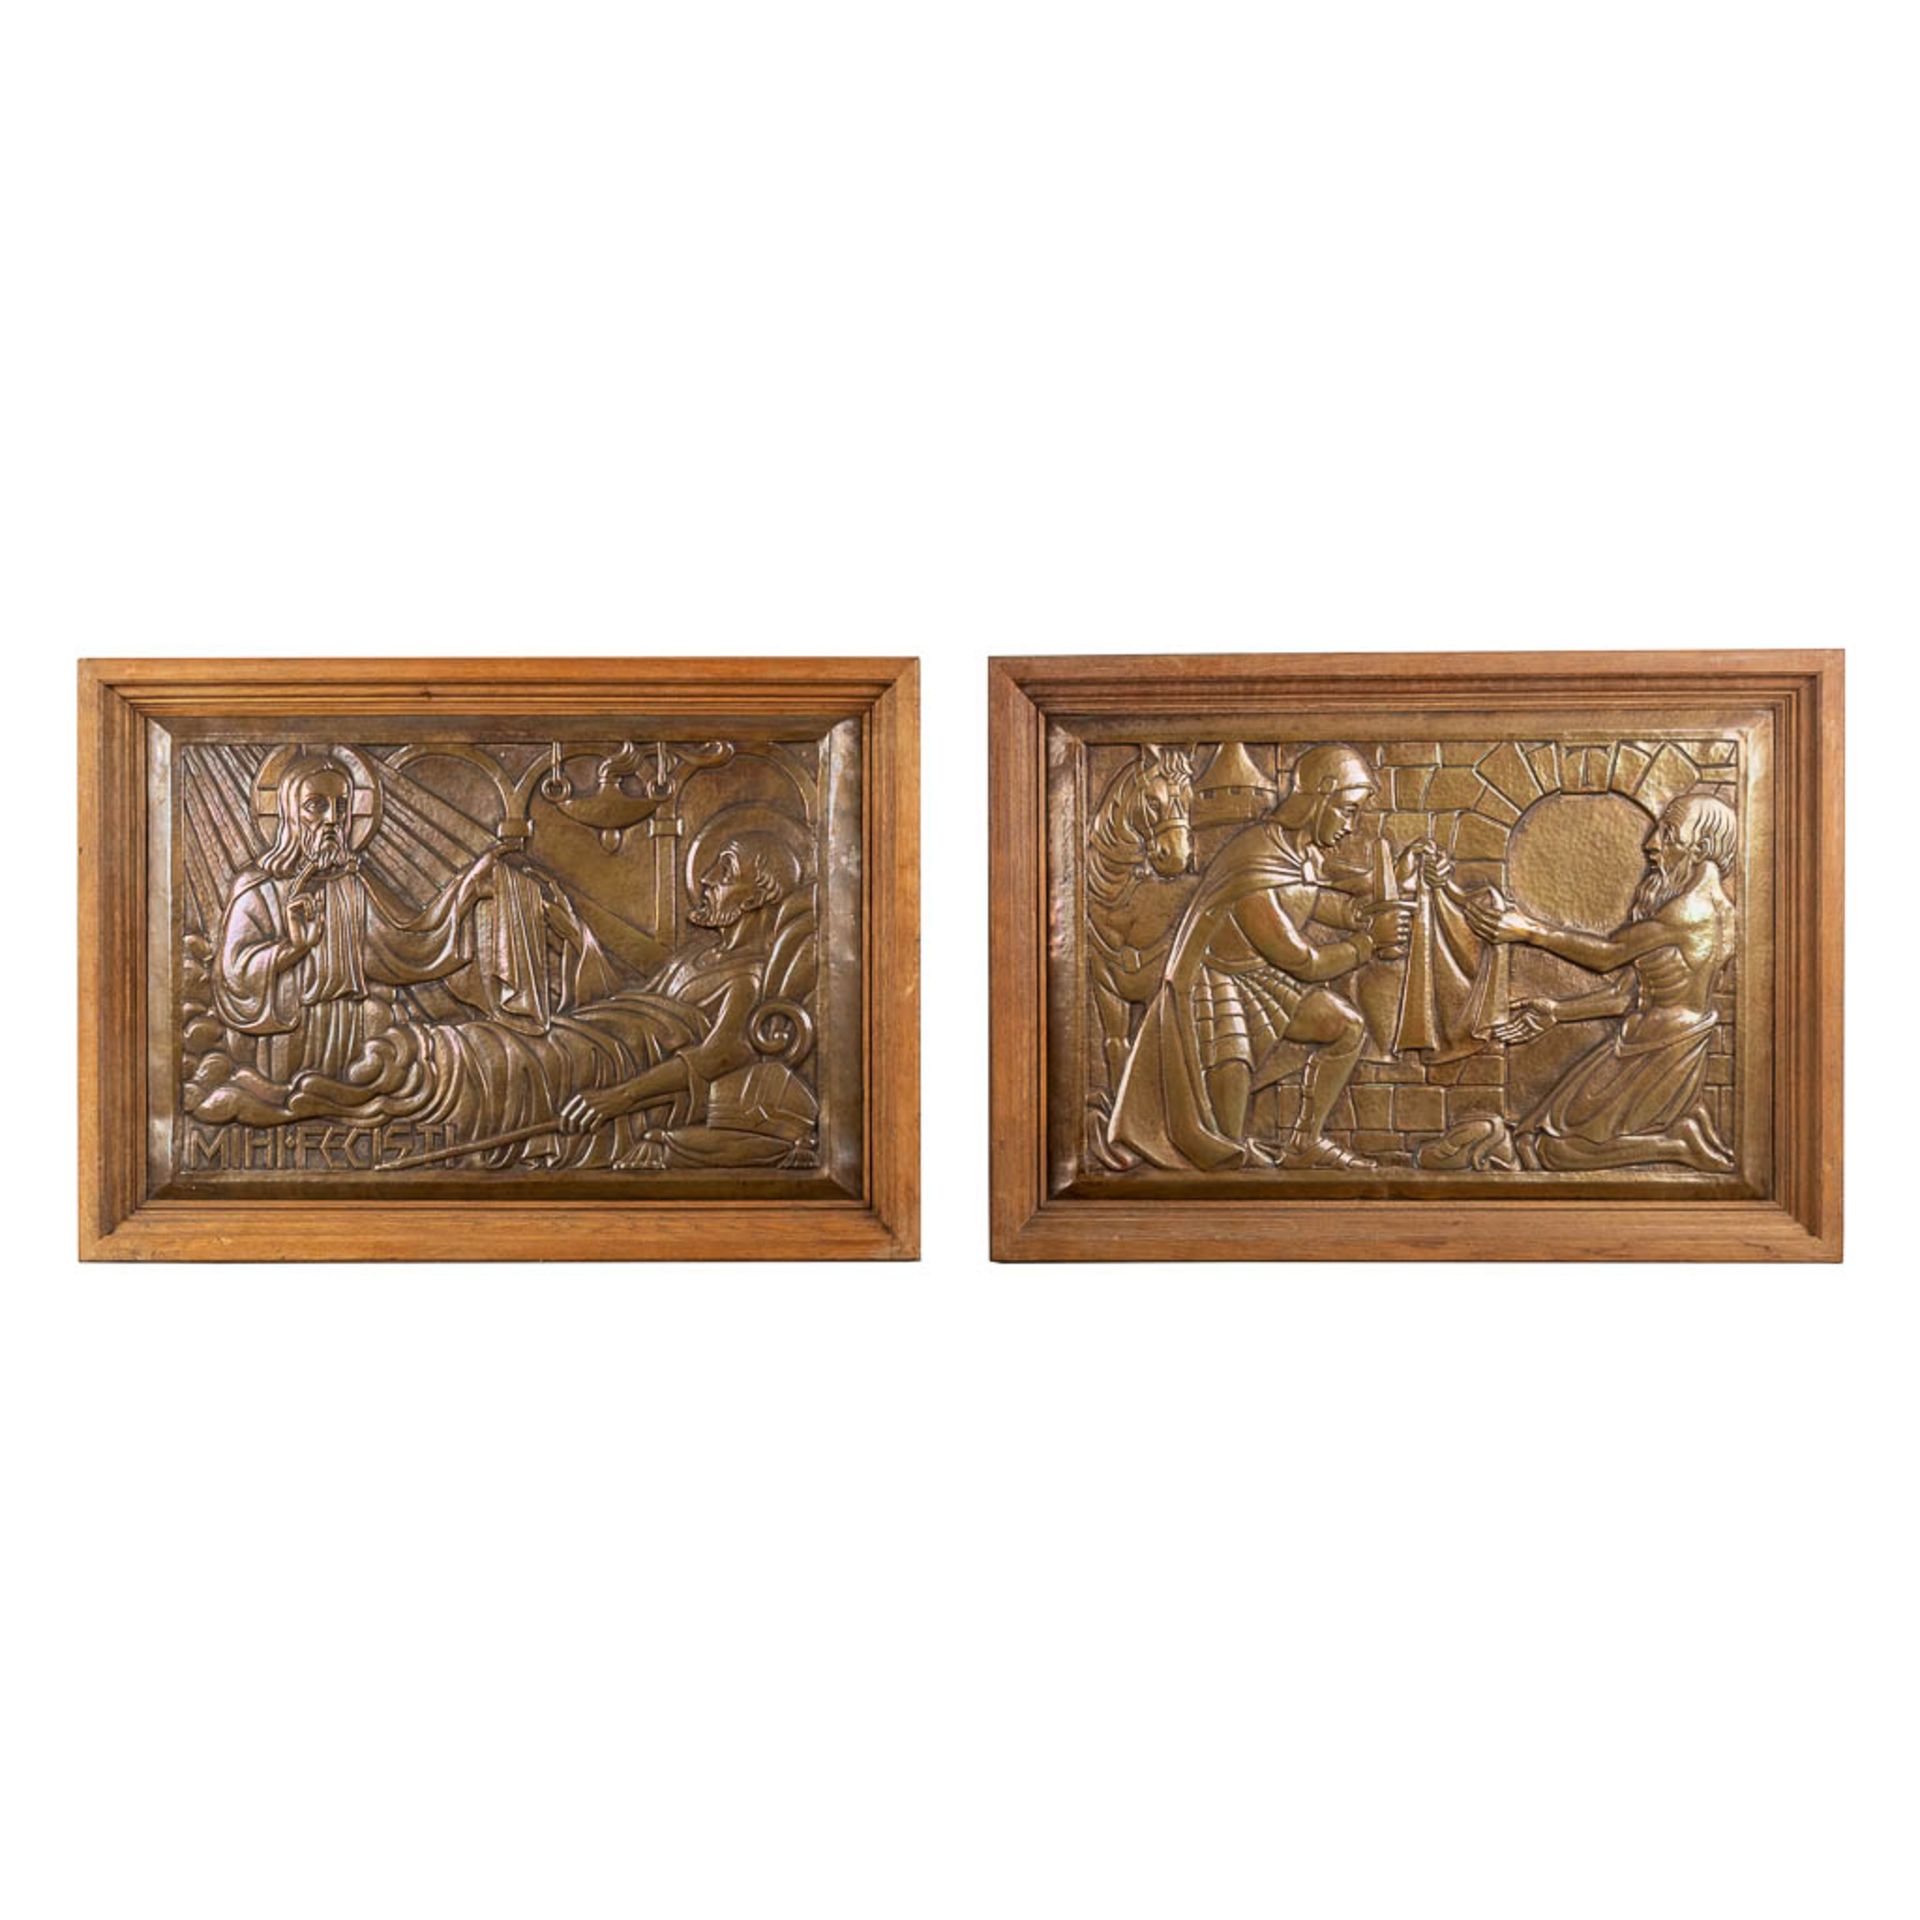 A pair of panels with religious scnes. Circa 1950. (W: 90 x H: 64 cm)